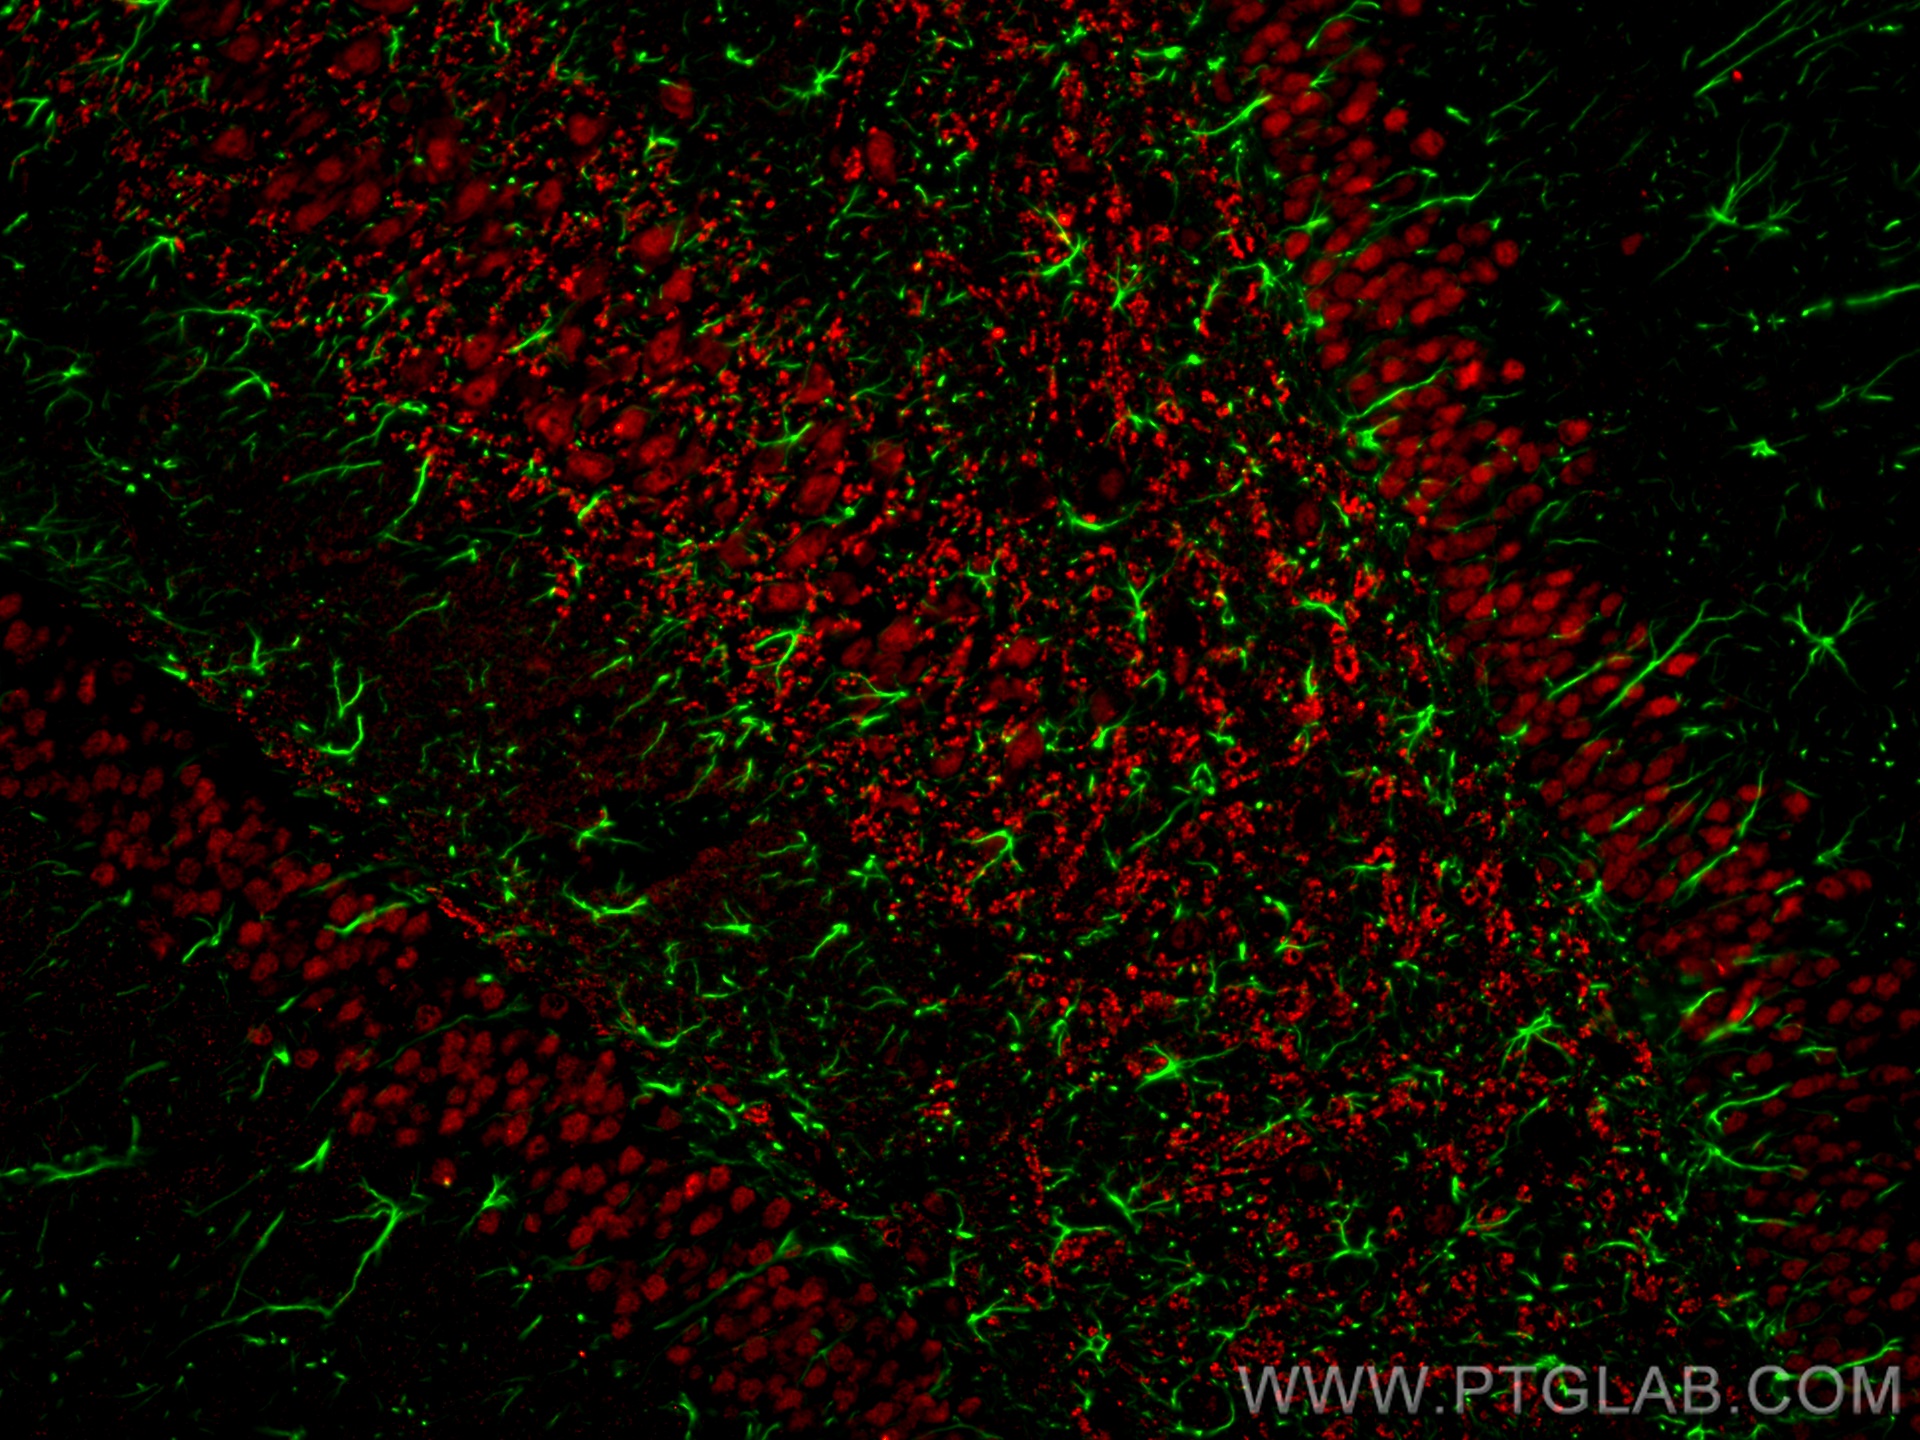 Immunofluorescence of rat brain: rat brain FFPE section was stained with Rabbit anti-GFAP polyclonal antibody (16825-1-AP, 1:200, green) and mouse anti-NeuN monoclonal antibody (66836-1-Ig, red). Multi-rAb CoraLite® Plus 488 conjugated Recombinant Goat anti-rabbit secondary antibody (RGAR002, 1:500) and Multi-rAb CoraLite® Plus 594 conjugated Goat Anti-Mouse Recombinant Secondary Antibody (H+L) were used for detection (RGAM004, 1:500) . 